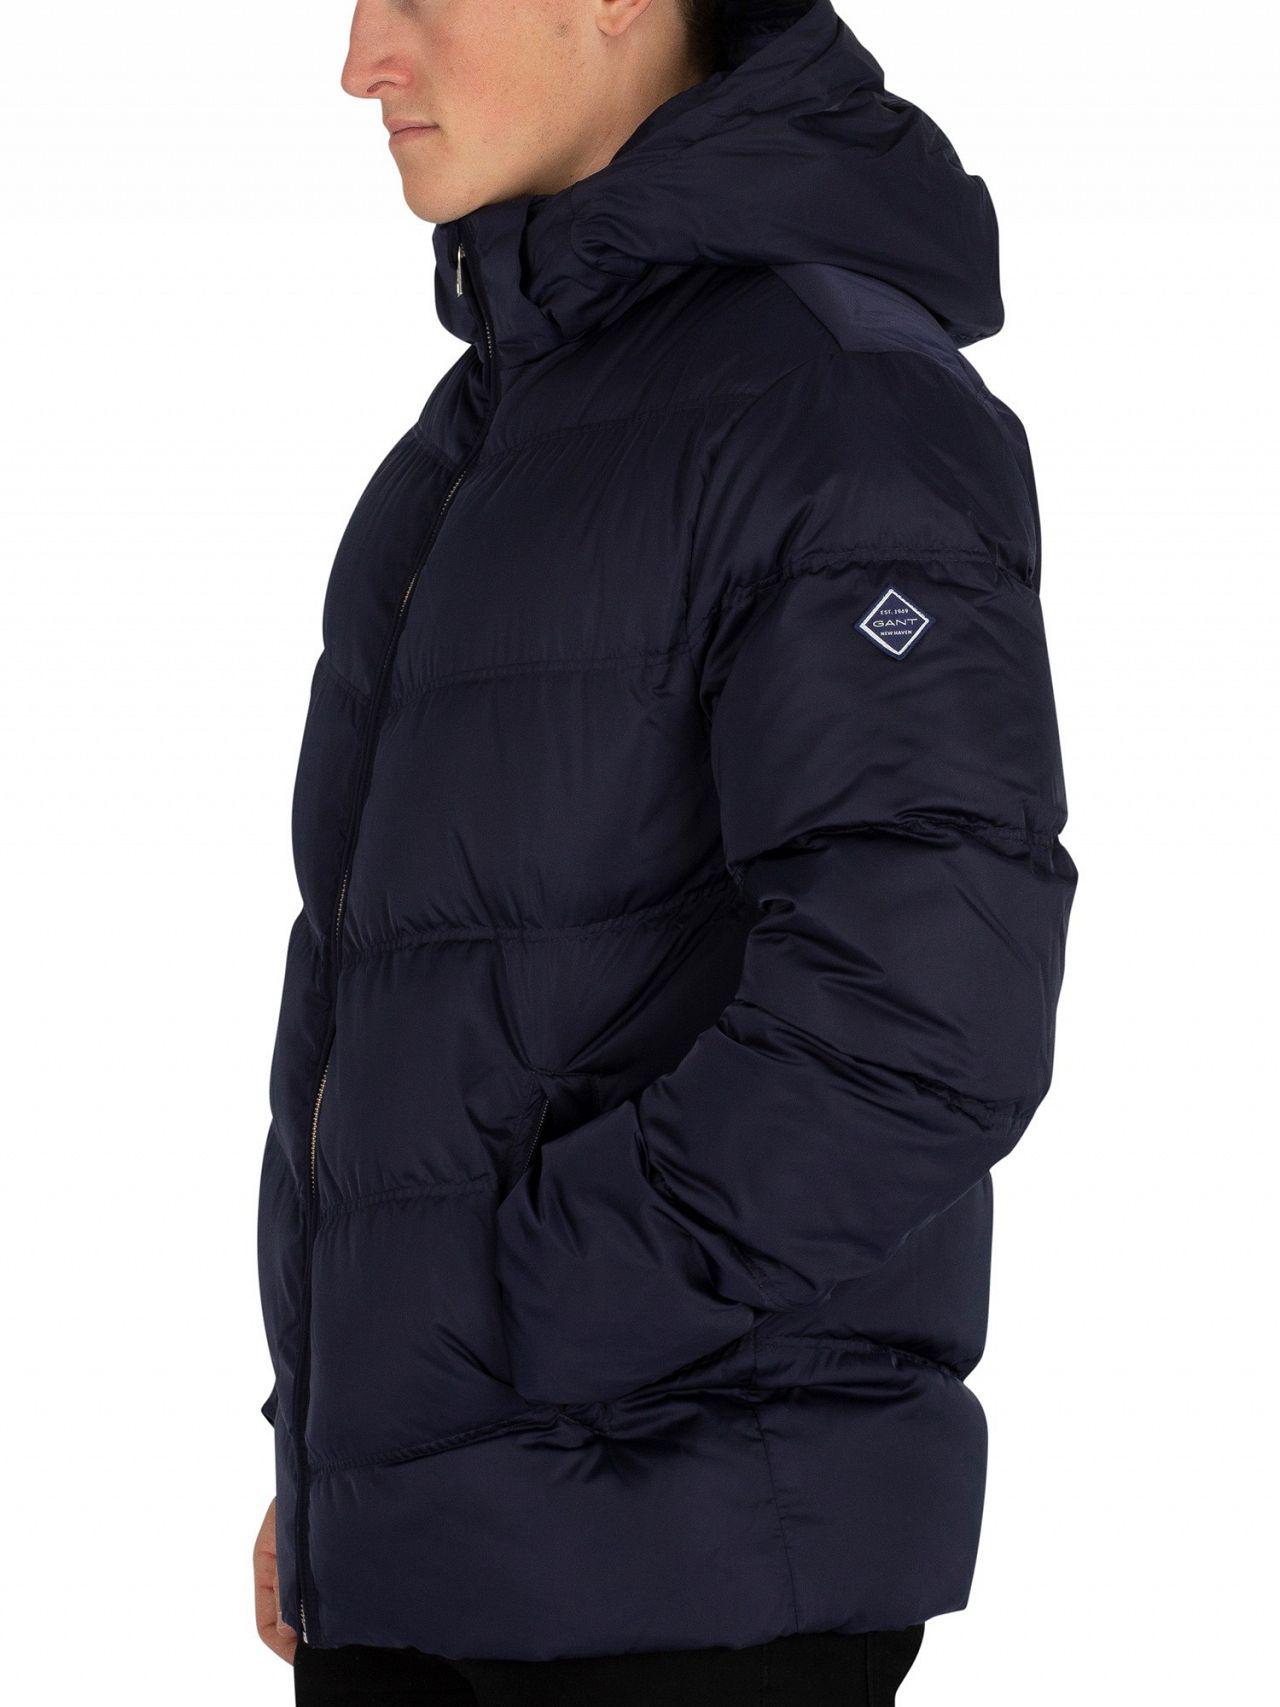 GANT Synthetic Marine The Alta Down Jacket in Blue for Men - Lyst